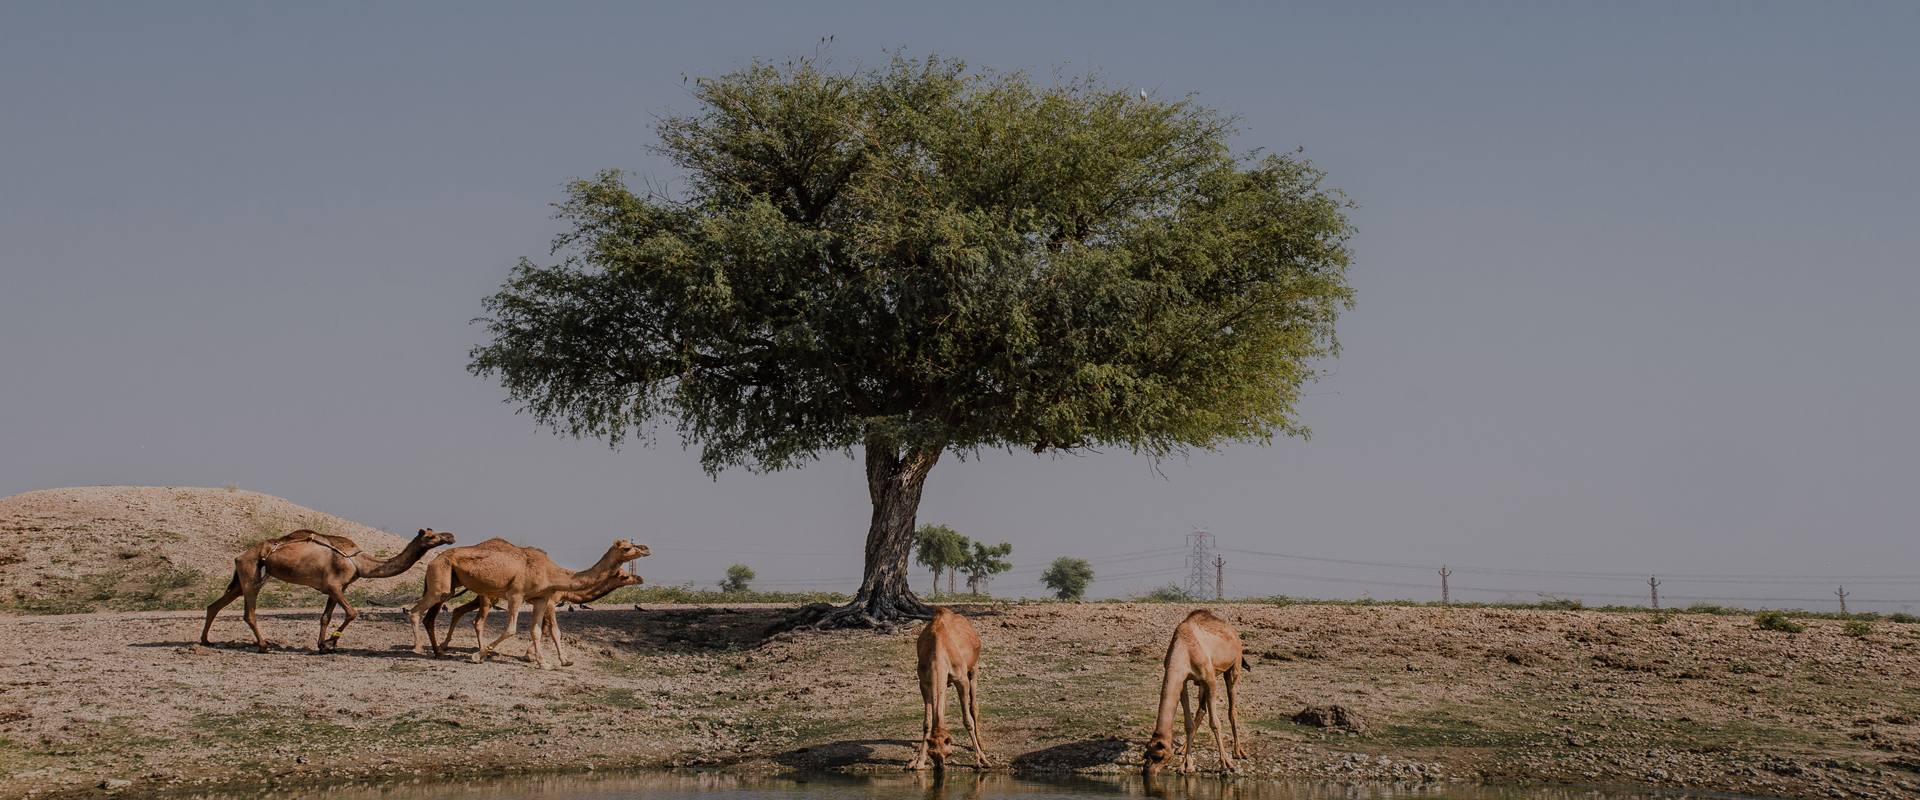 From liability to coexistence: Changing relations of camels with the community